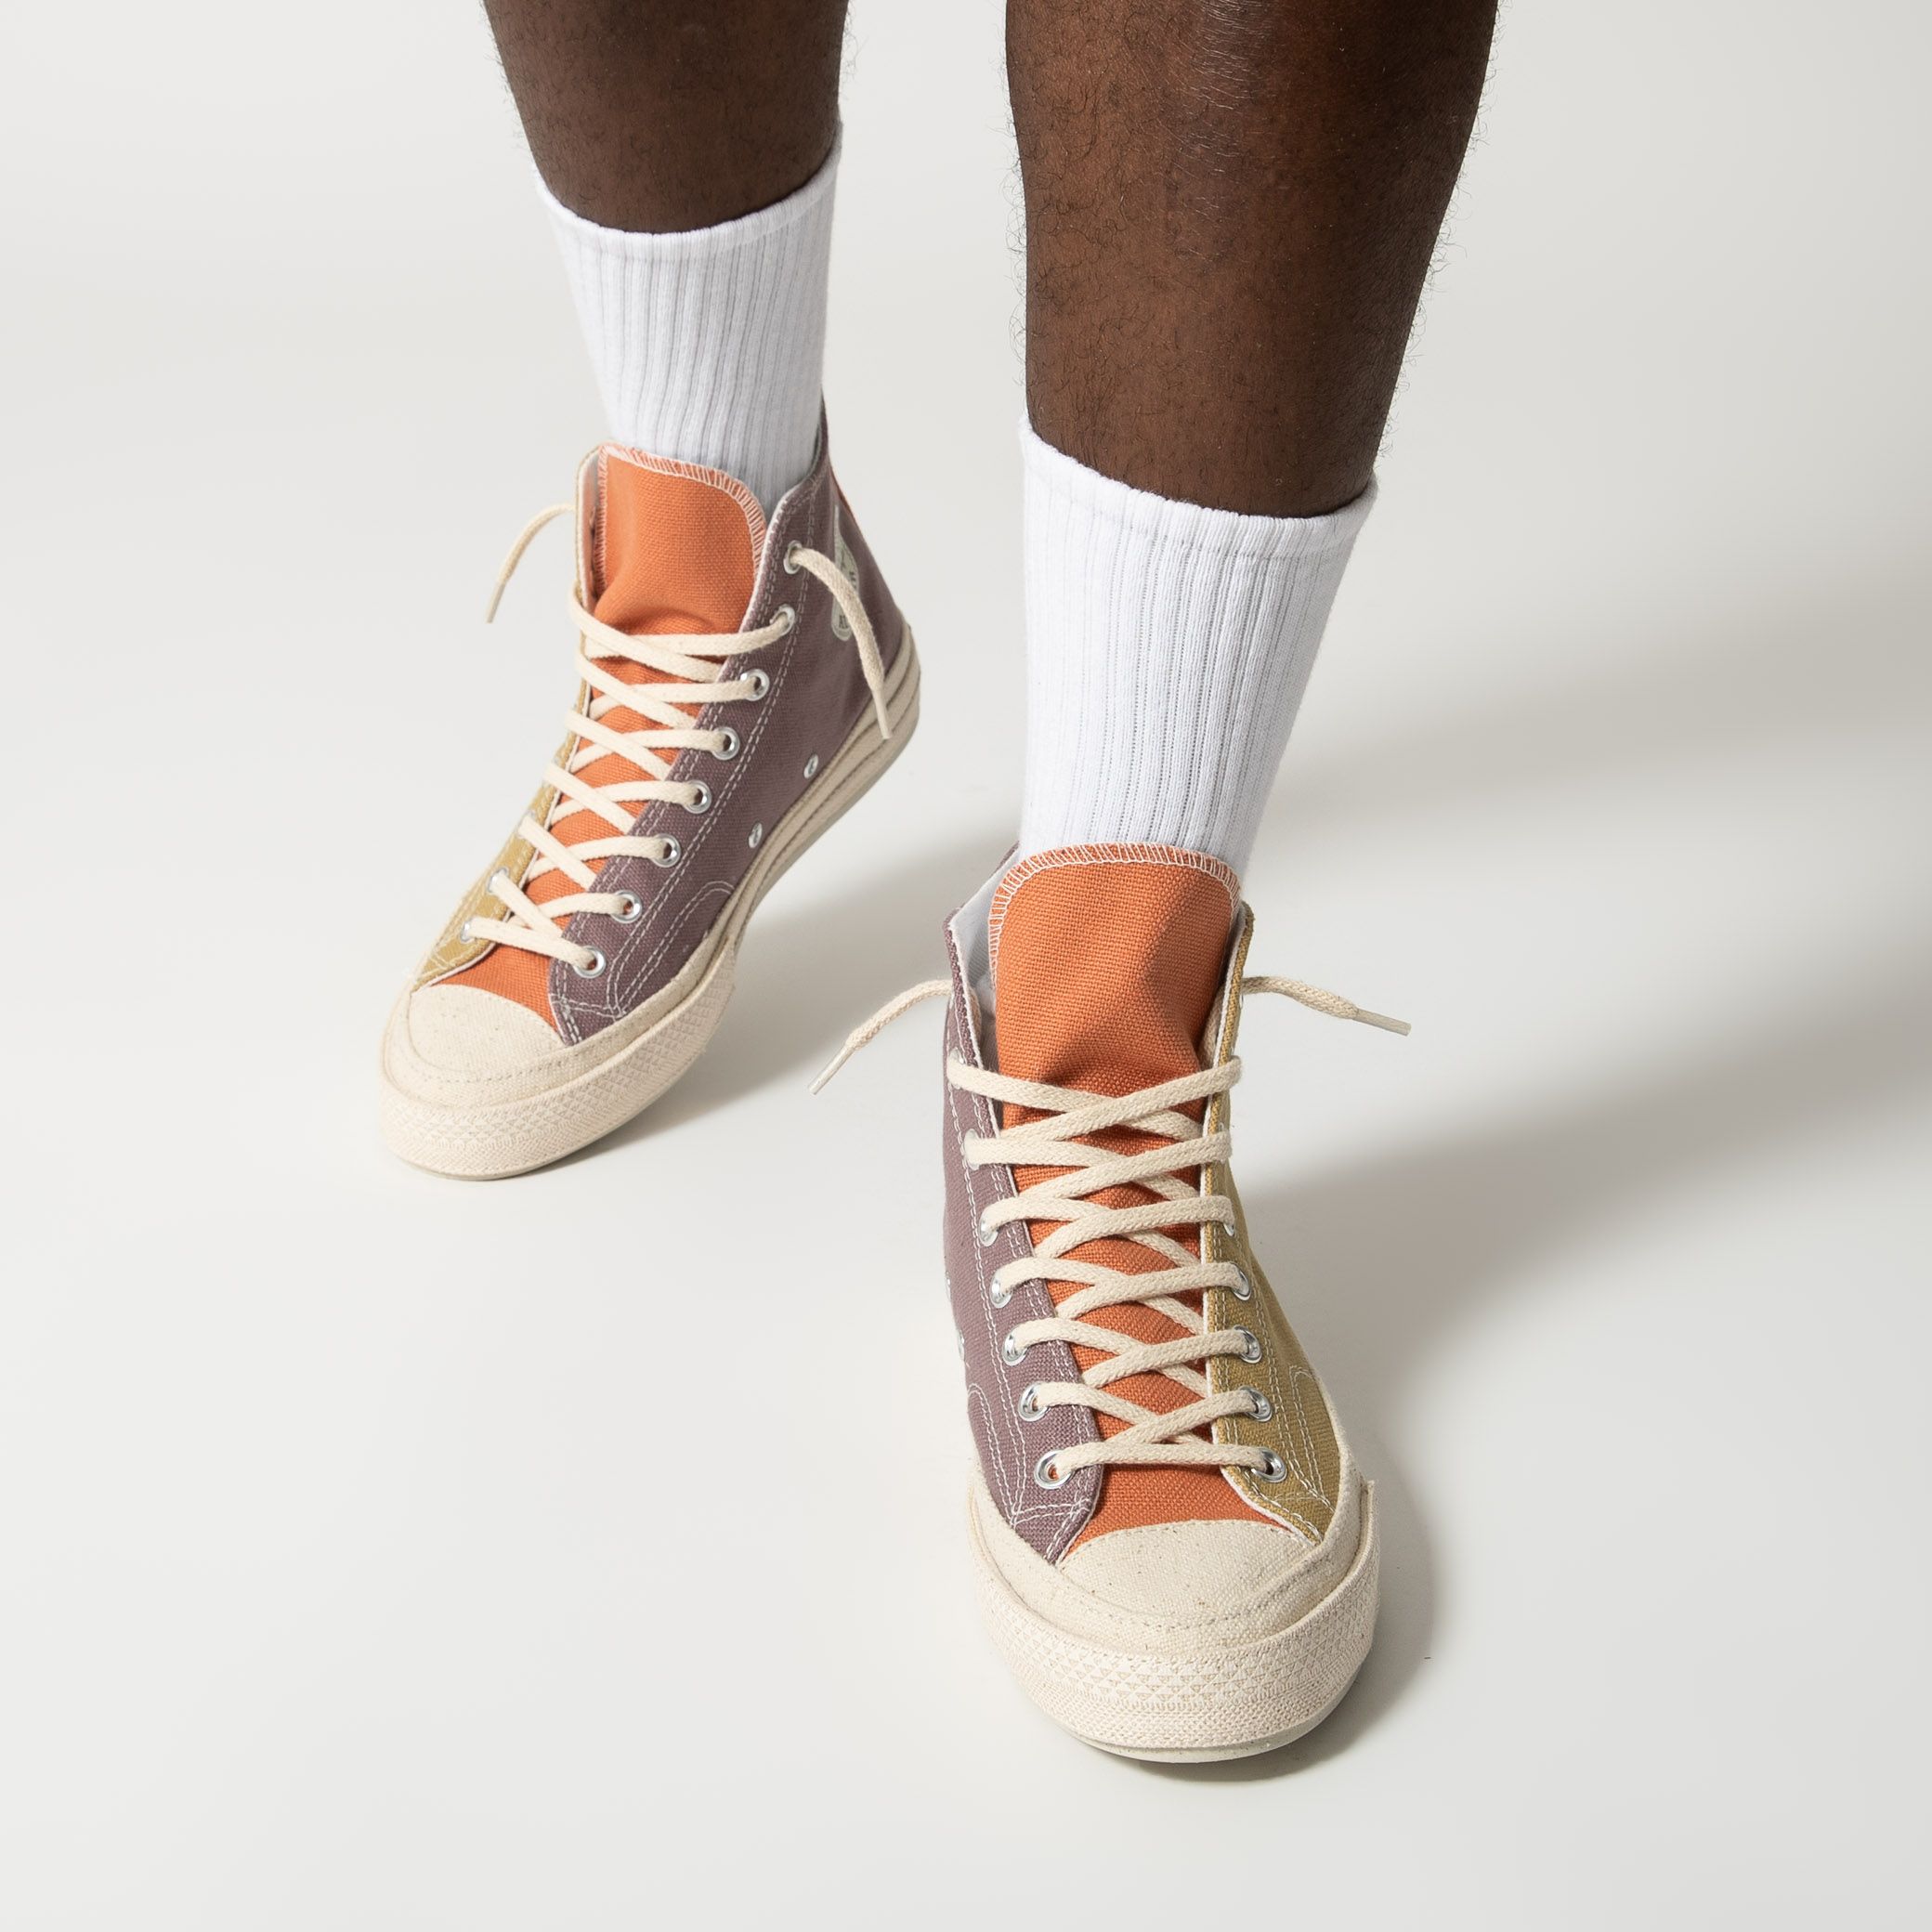 on Twitter: "#outNOW 🔥 Converse Chuck 70s "Tri Panel Renew" Pack take your chance ➡️ sizerun 💃🏽 4 (36) - US 12 (46.5) style code 🔎 167767C and 167772C